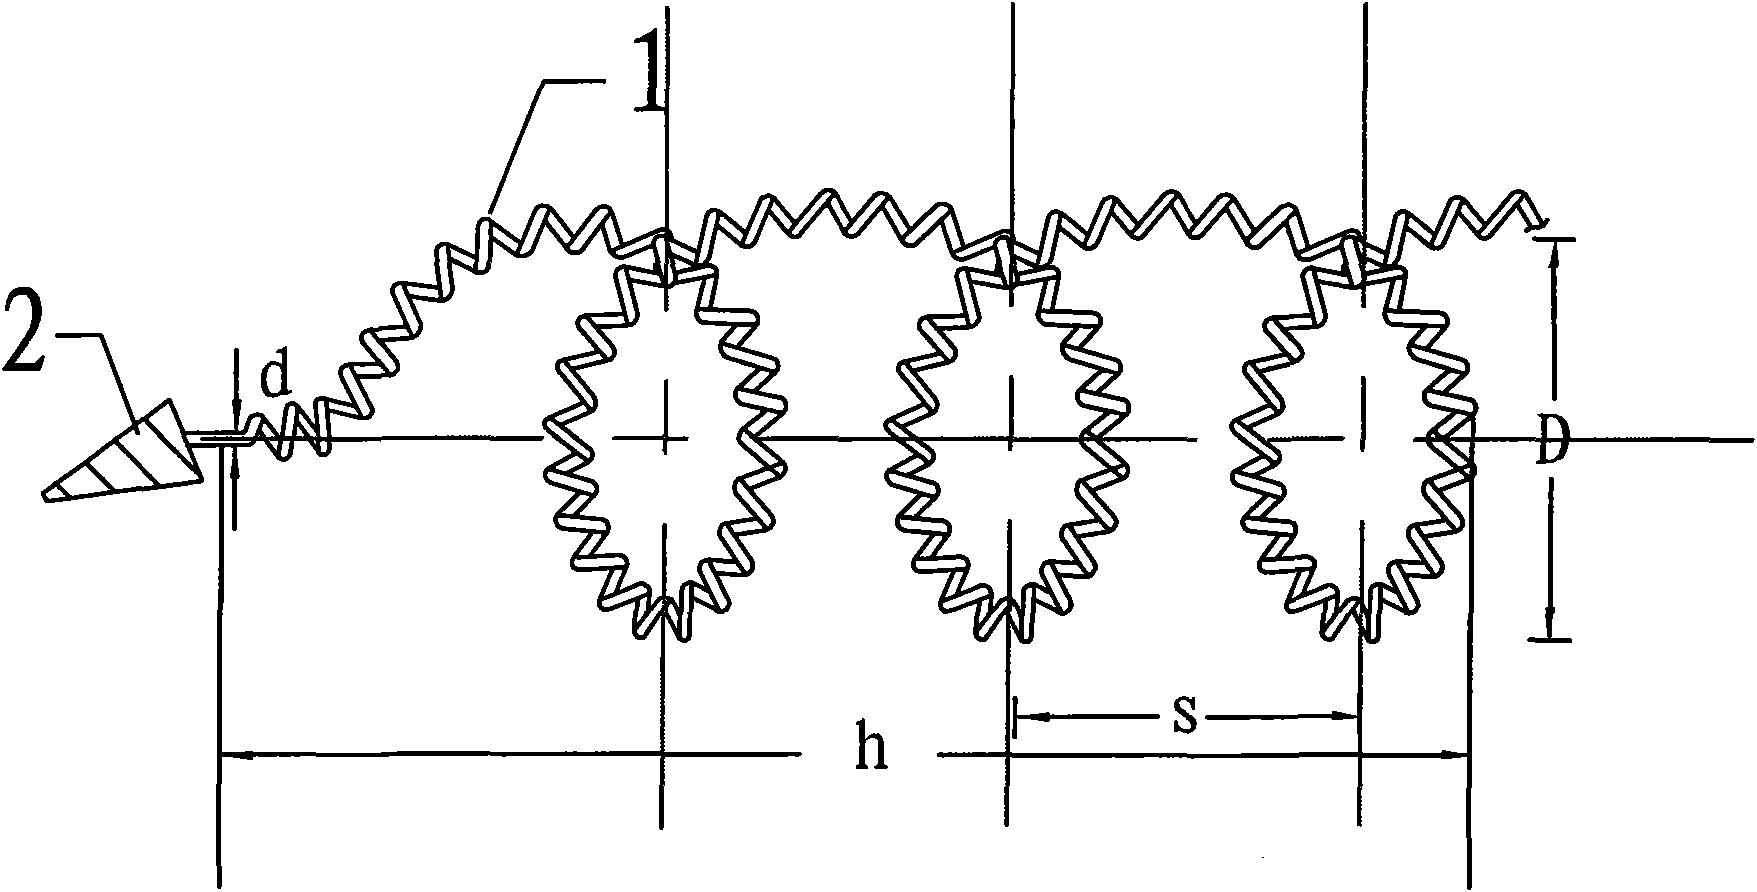 Small helical antenna